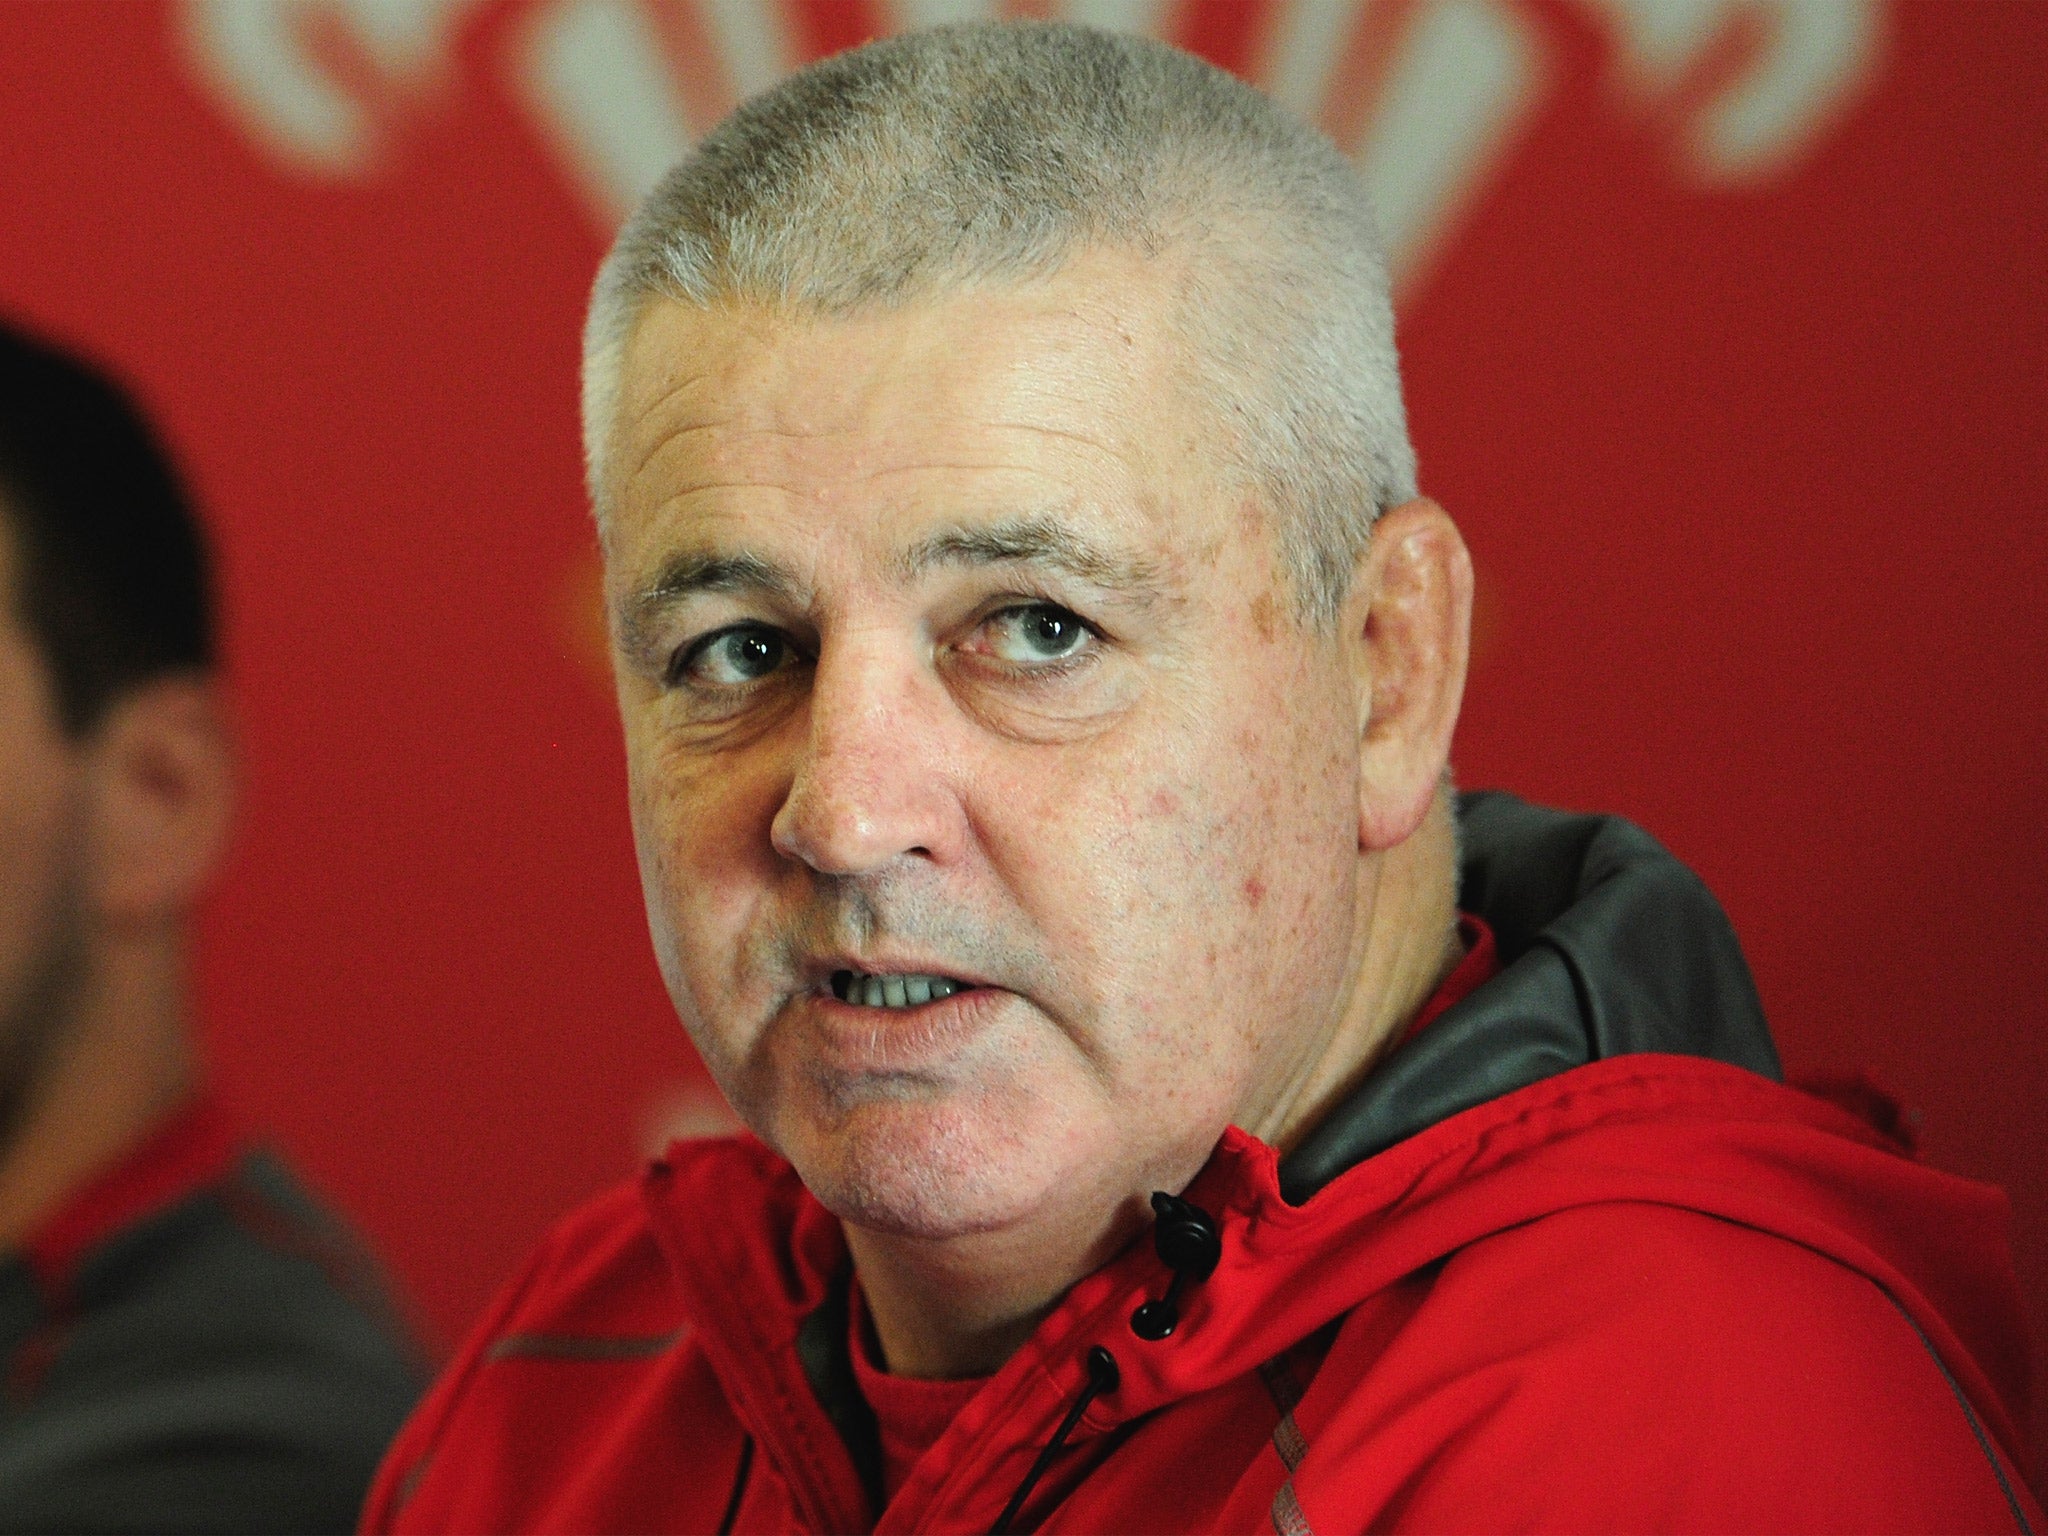 Warren Gatland, the Wales coach, believes a win at Twickenham would put doubts in England minds